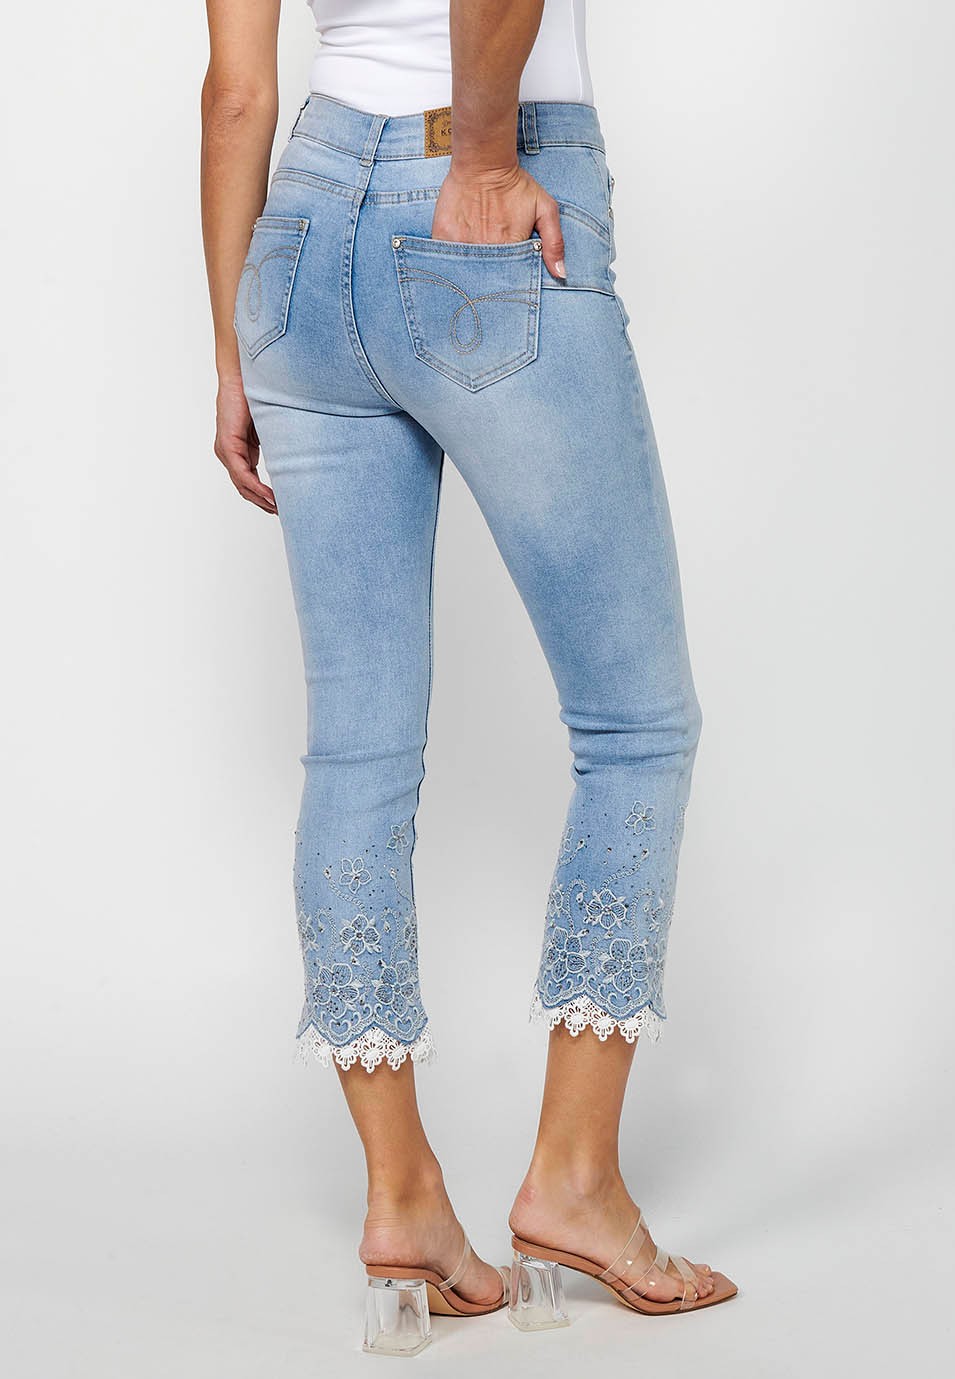 Long slim jeans pants with front zipper closure and light blue floral embroidered details for women 6